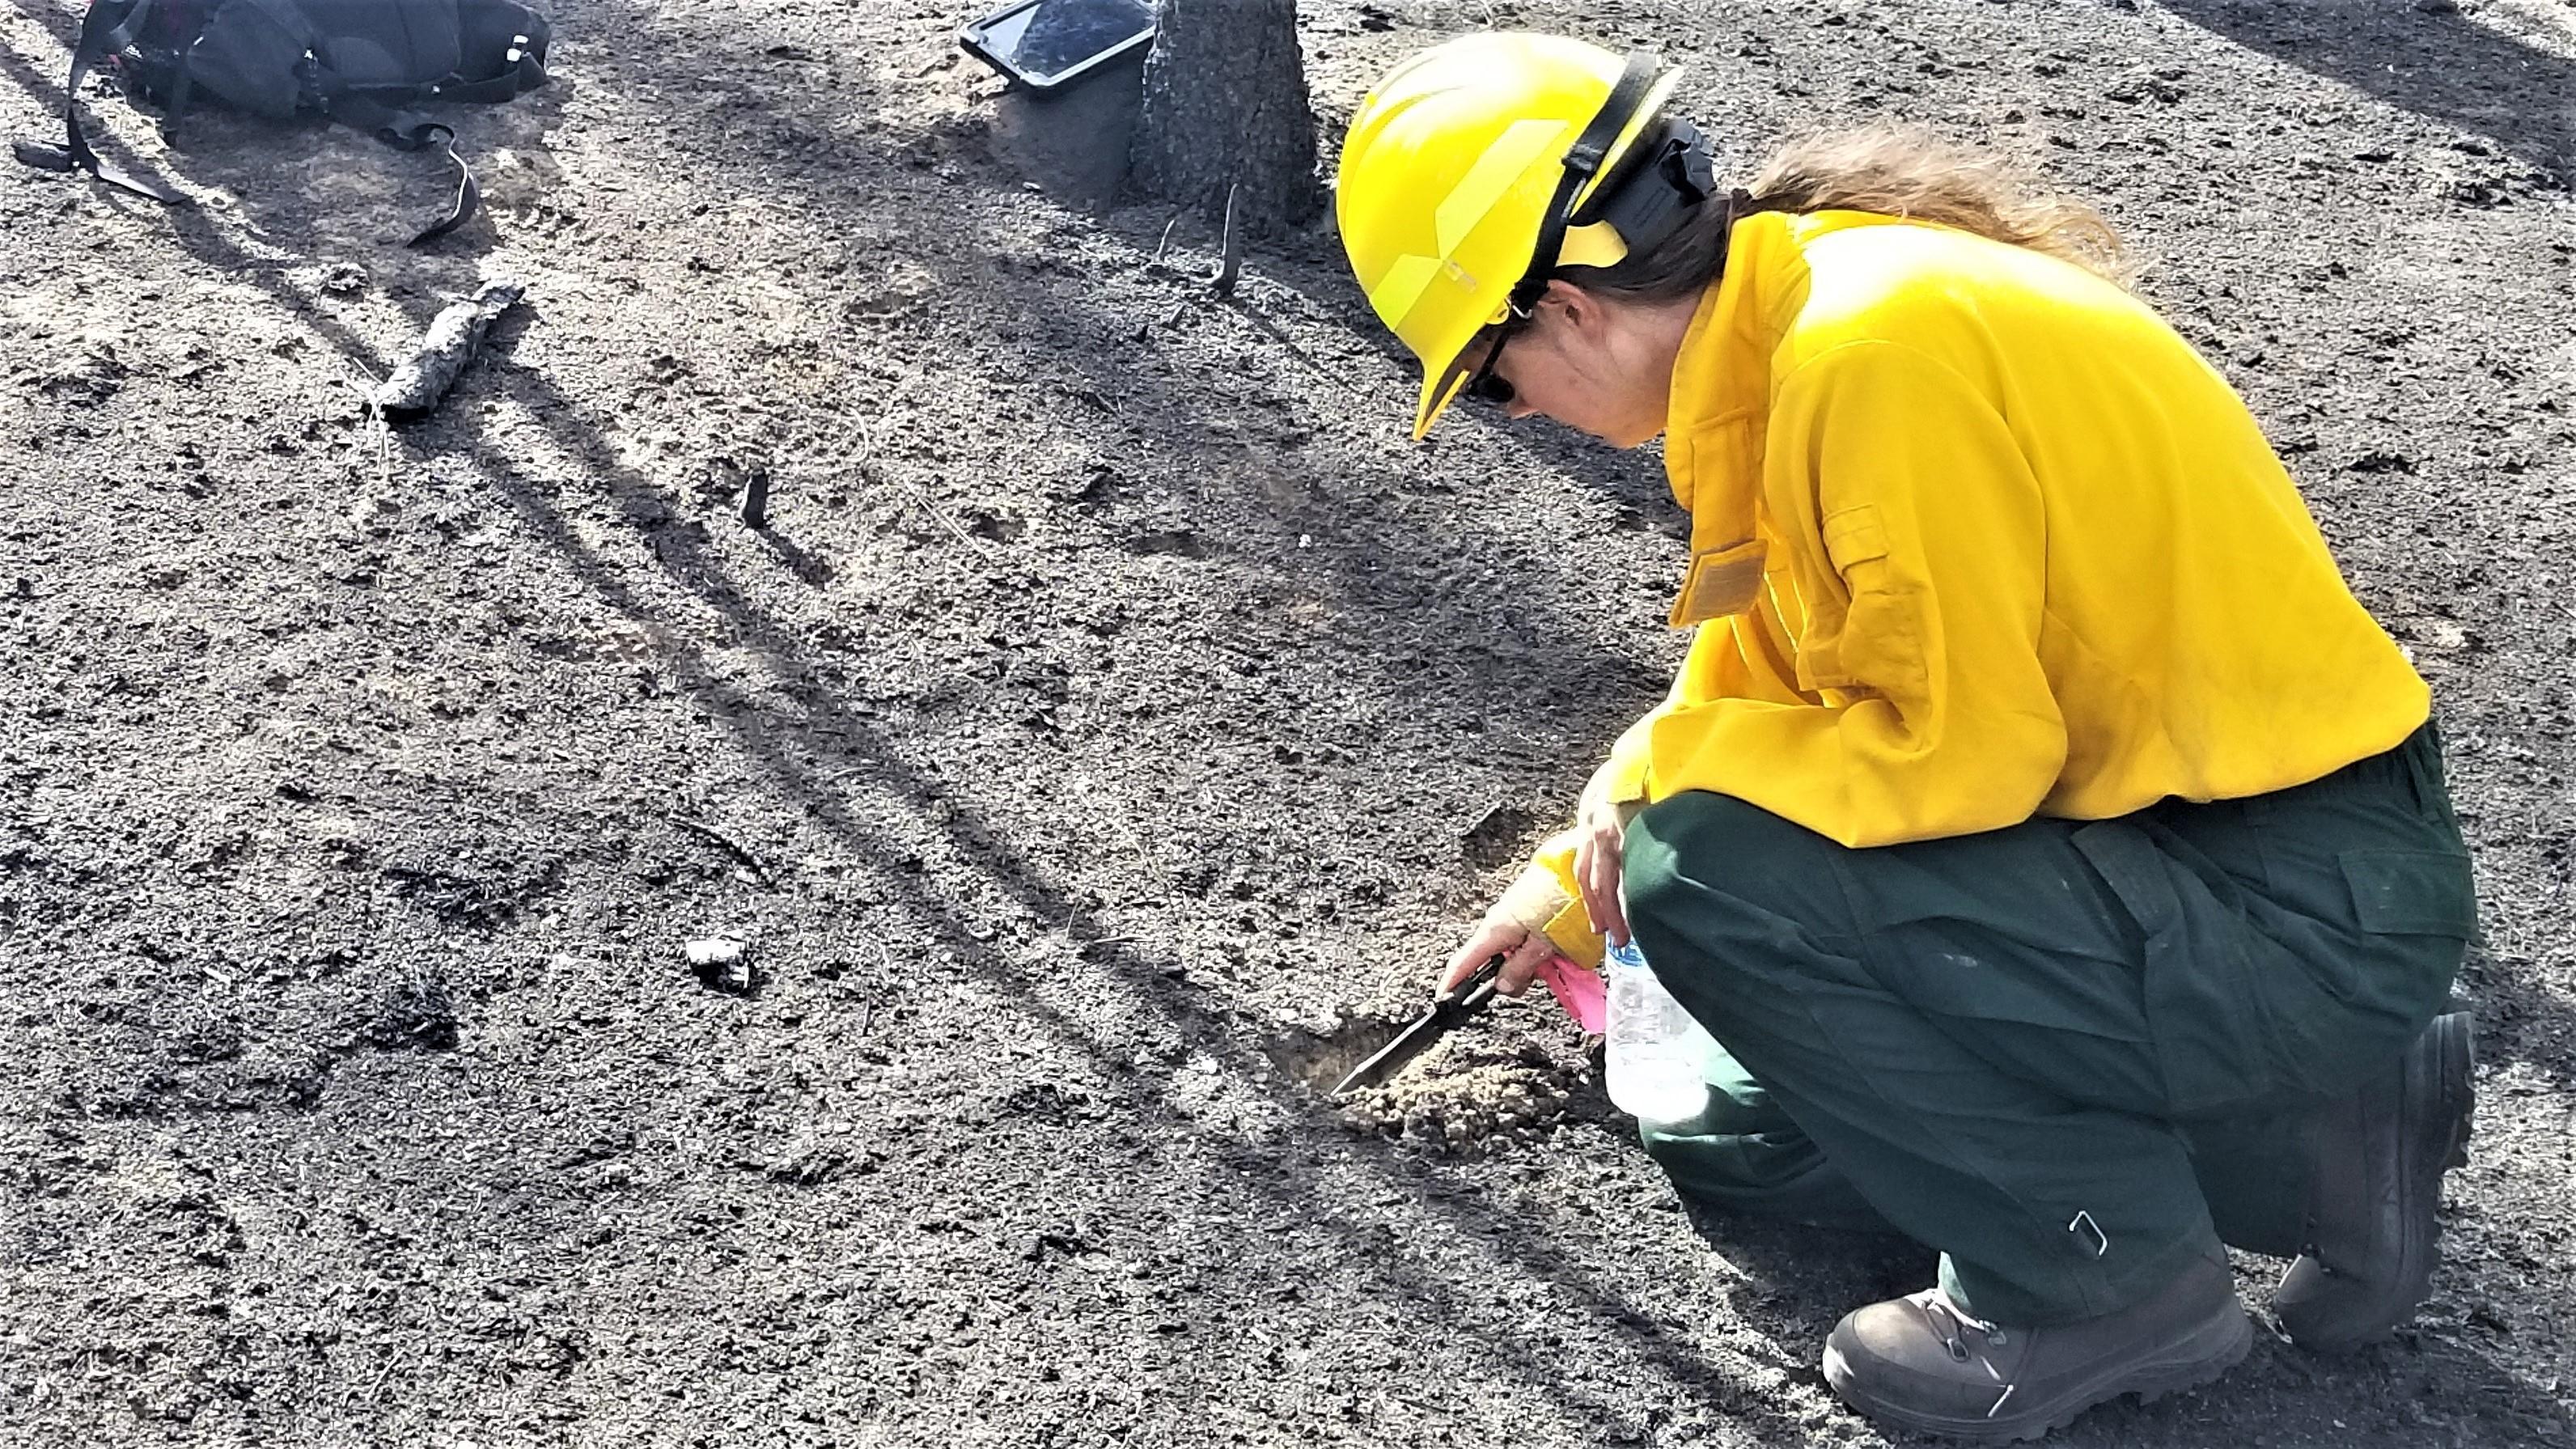 Image showing BAER Soil Scientist Susie Roe assessing soil hydrophobicity and changes to soil structure in a high severity burned area of the Hermits Peak Fire